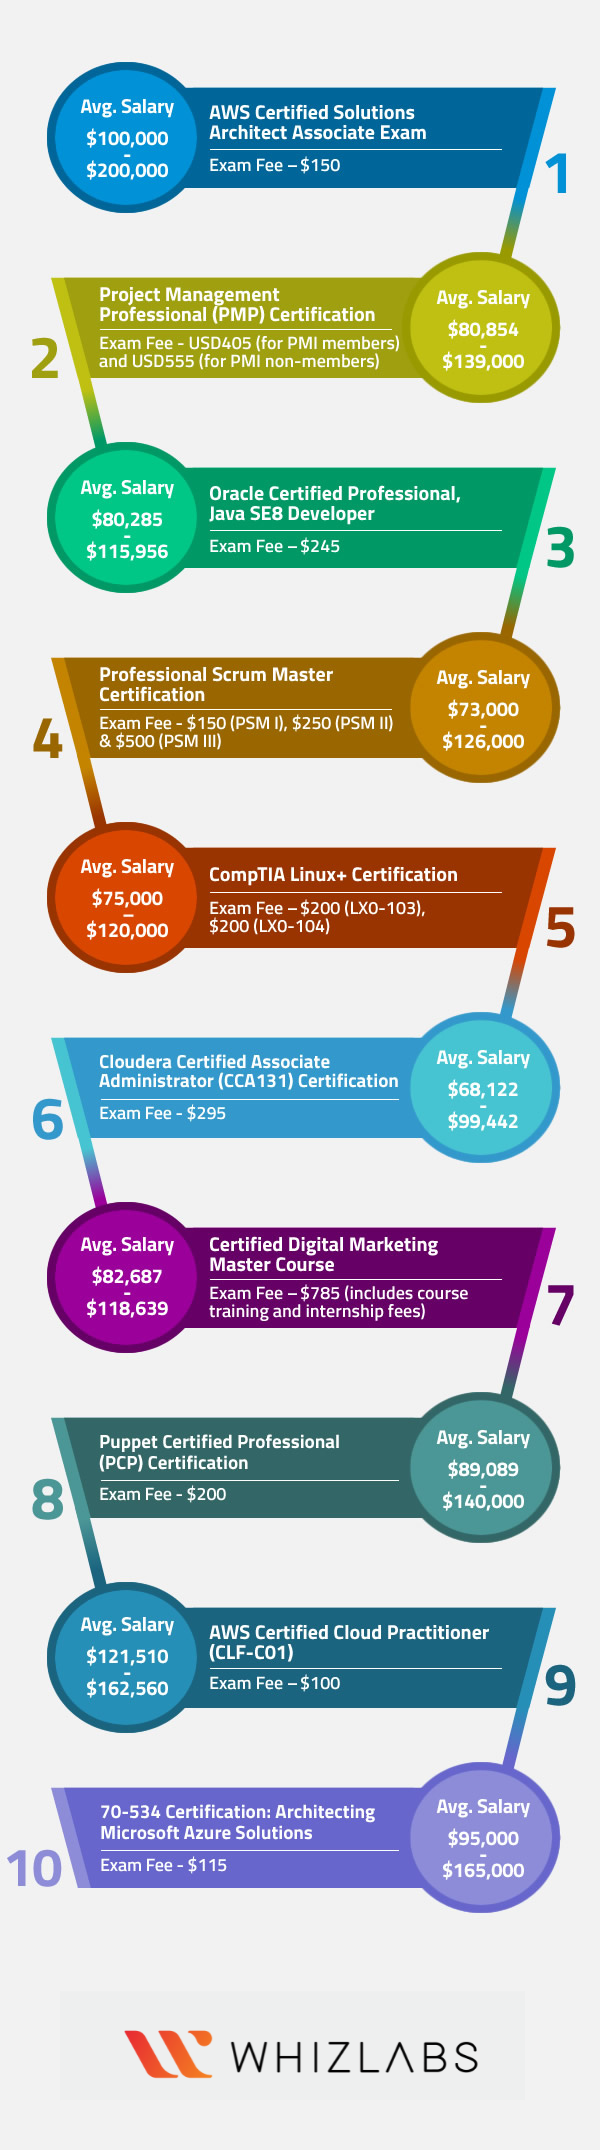 Top 20 IT Certifications in 20 Updated   Whizlabs Blog